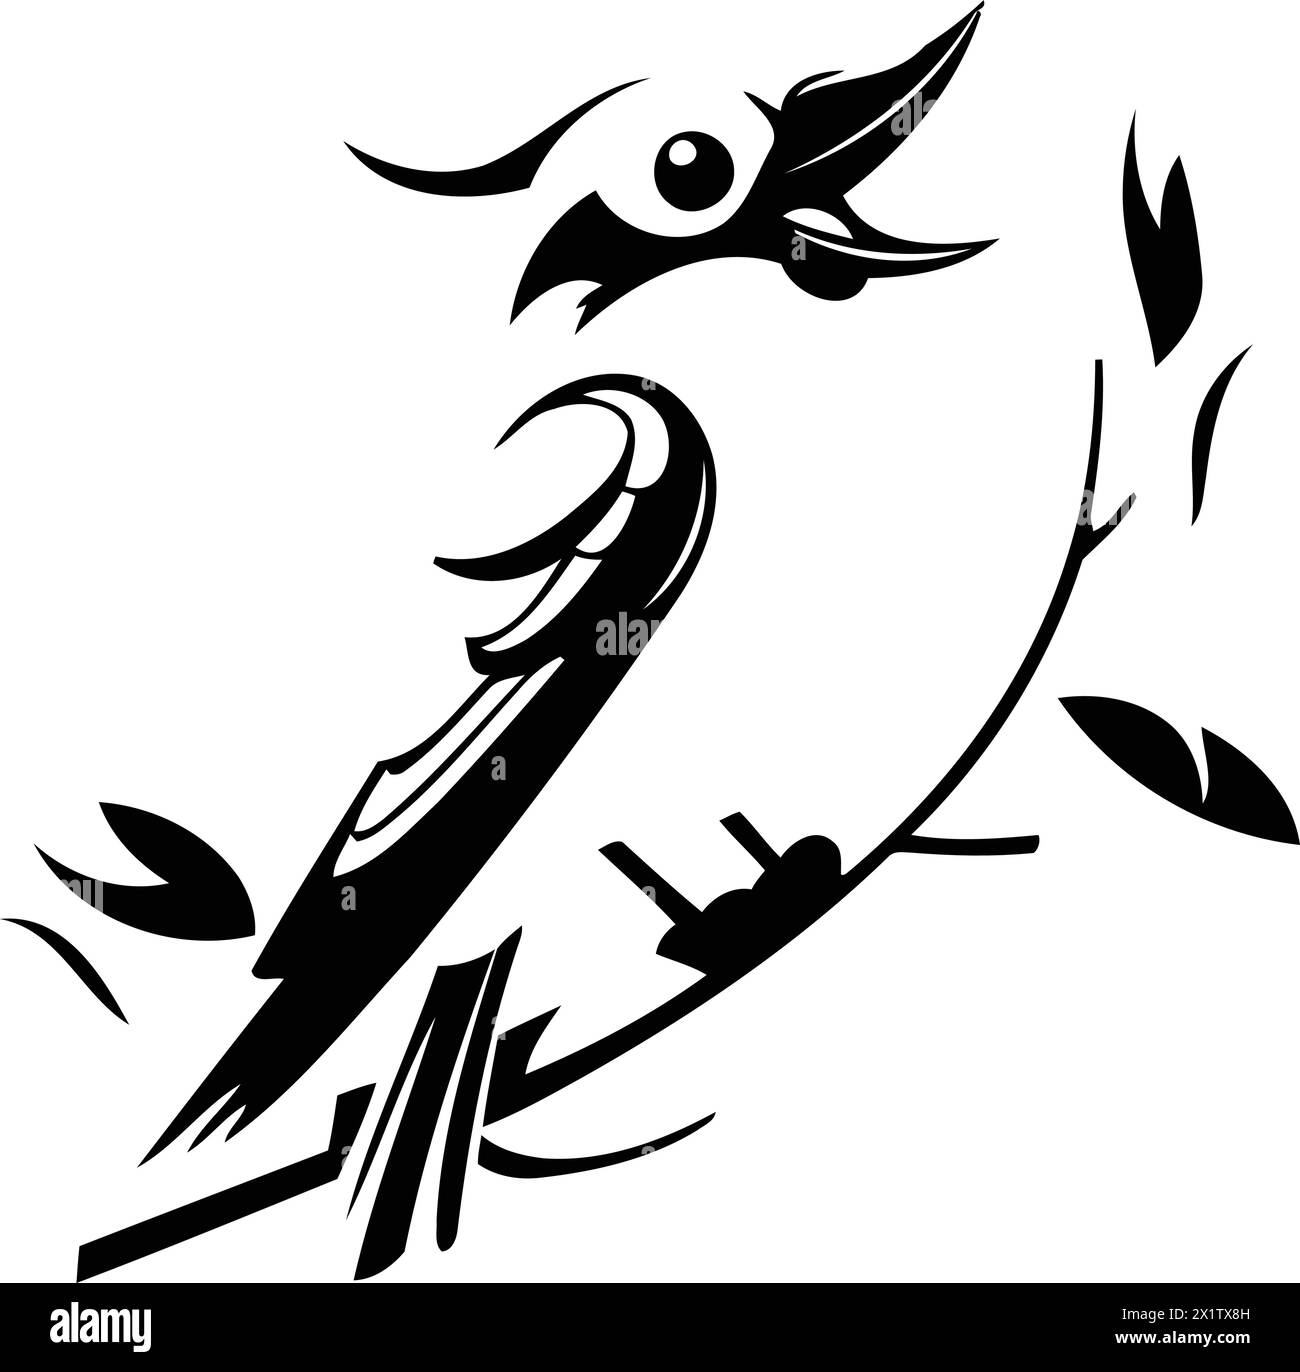 Blue jay bird sitting on a branch. Vector illustration on white background. Stock Vector